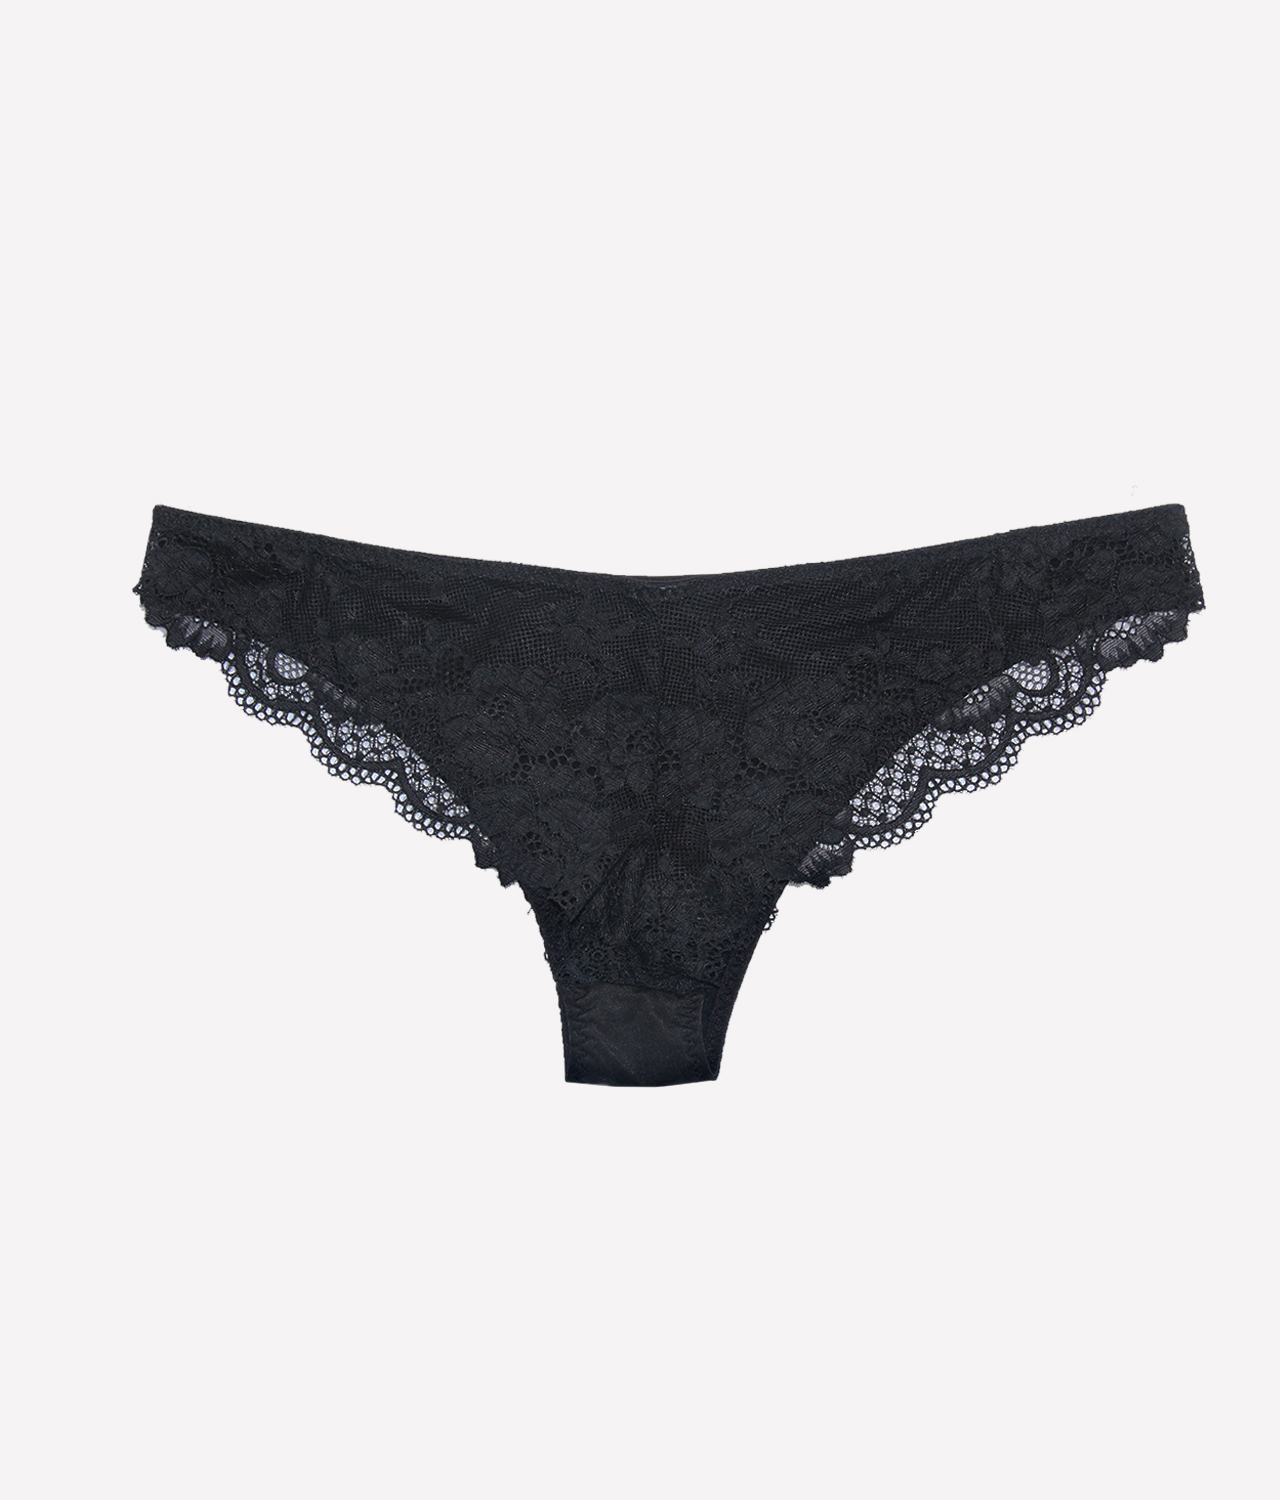 TOFO Women's Black Micro Fibre Cheeky Underwear With Lace Detailing